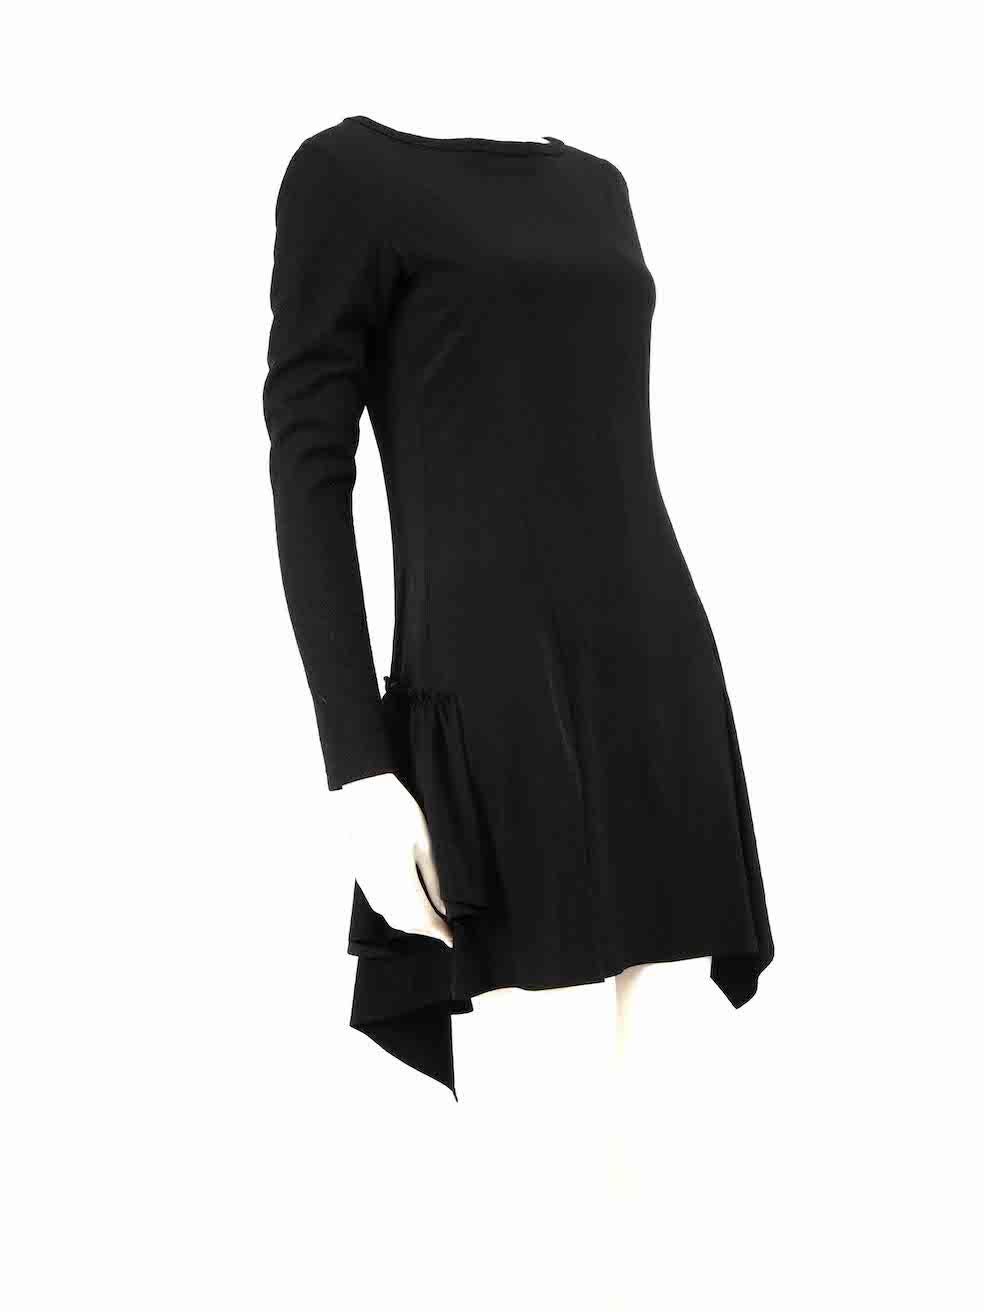 CONDITION is Very good. Hardly any visible wear to dress is evident on this used Yohji Yamamoto designer resale item.
 
 
 
 Details
 
 
 Black
 
 Synthetic
 
 Dress
 
 Mini
 
 Long sleeves
 
 Round neck
 
 Ruffle trim
 
 Side sip fastening
 
 
 
 
